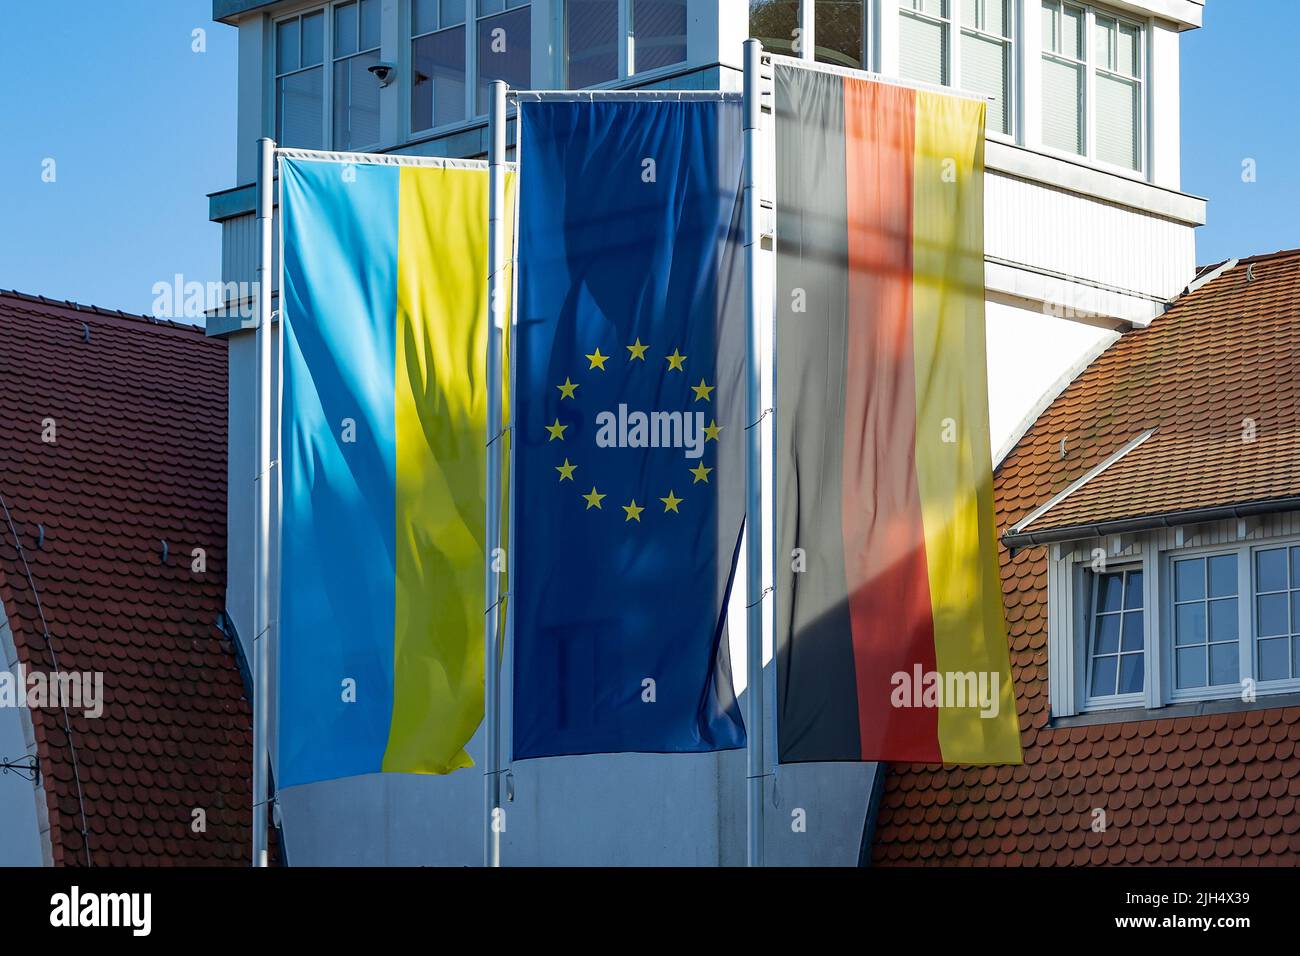 The flags from Ukraine, Europe and Germany have been raised in the middle of a holiday resort (Boltenhagen). Solidarity, compassion and standing toget Stock Photo